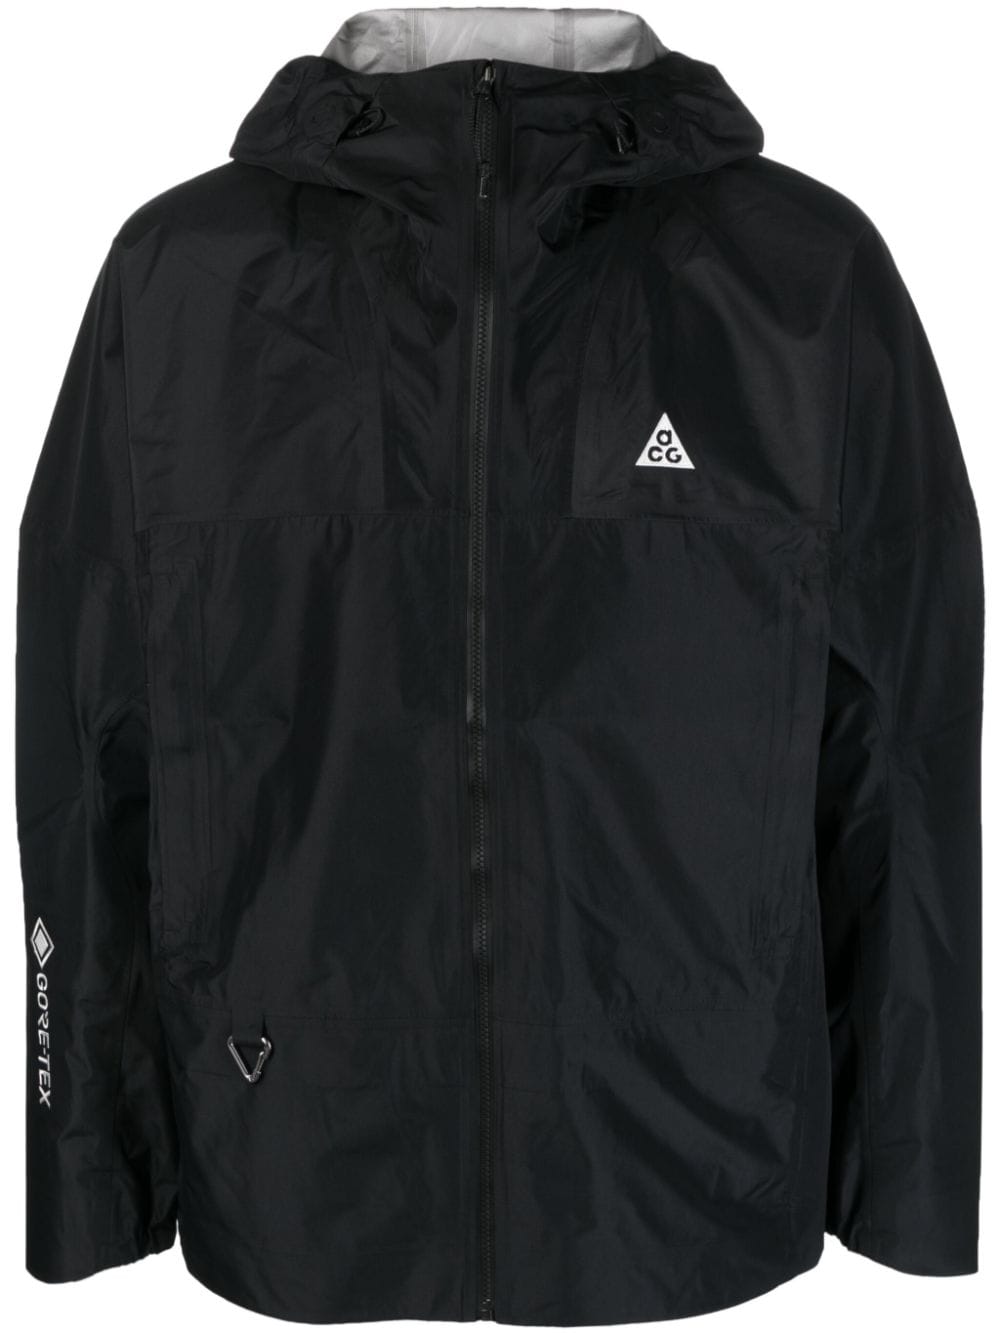 Nike ACG Chain of Craters hooded jacket - Black von Nike